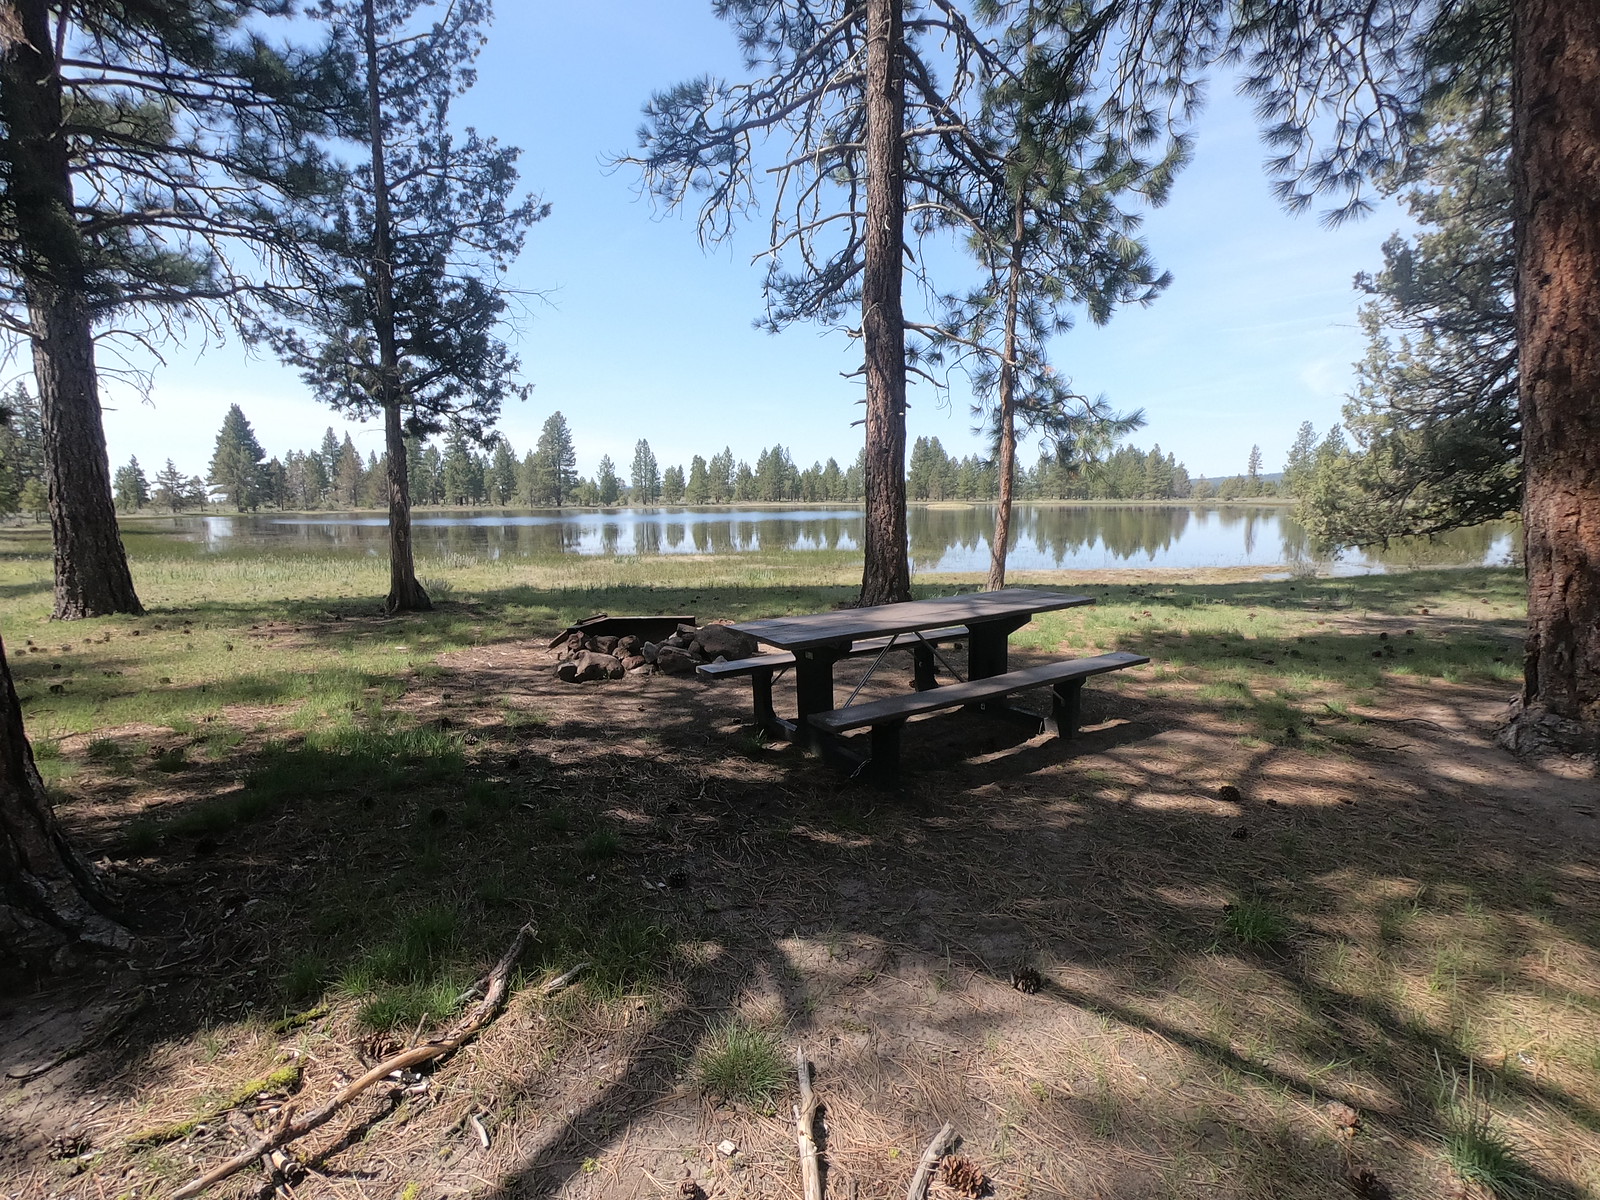 View of a campsite and Gerber Reservoir.